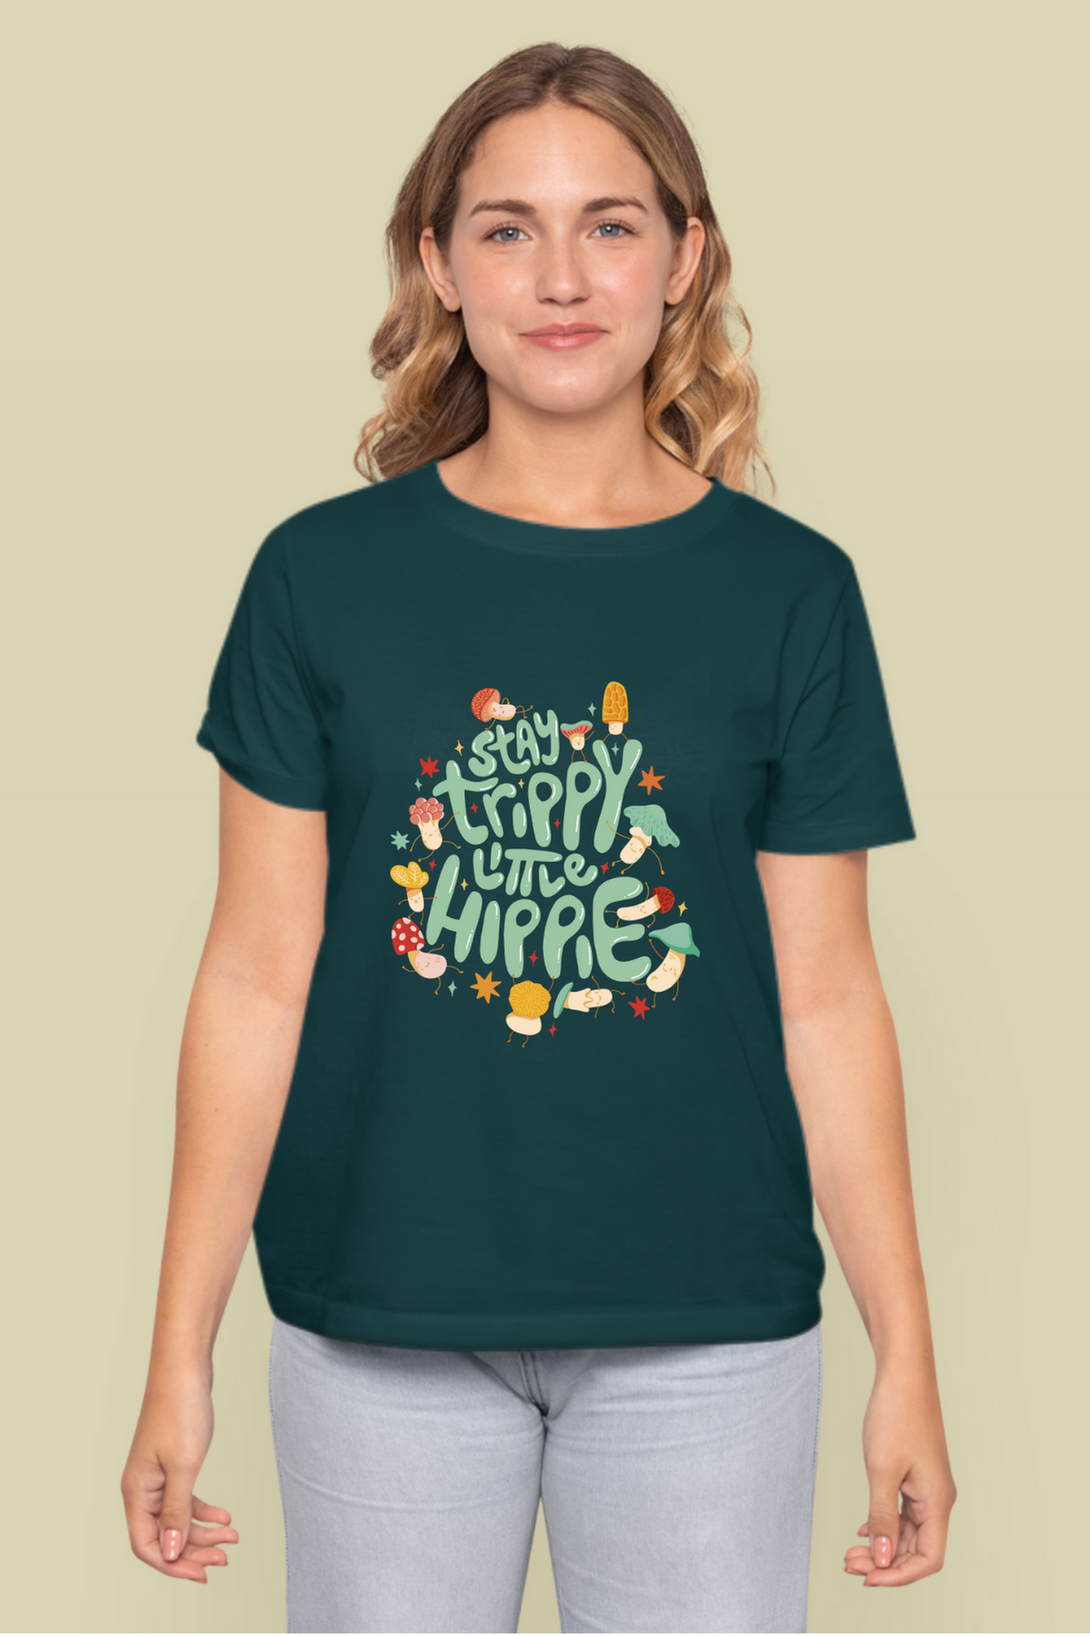 Stay Trippy Little Hippie Printed T-Shirt For Women - WowWaves - 10